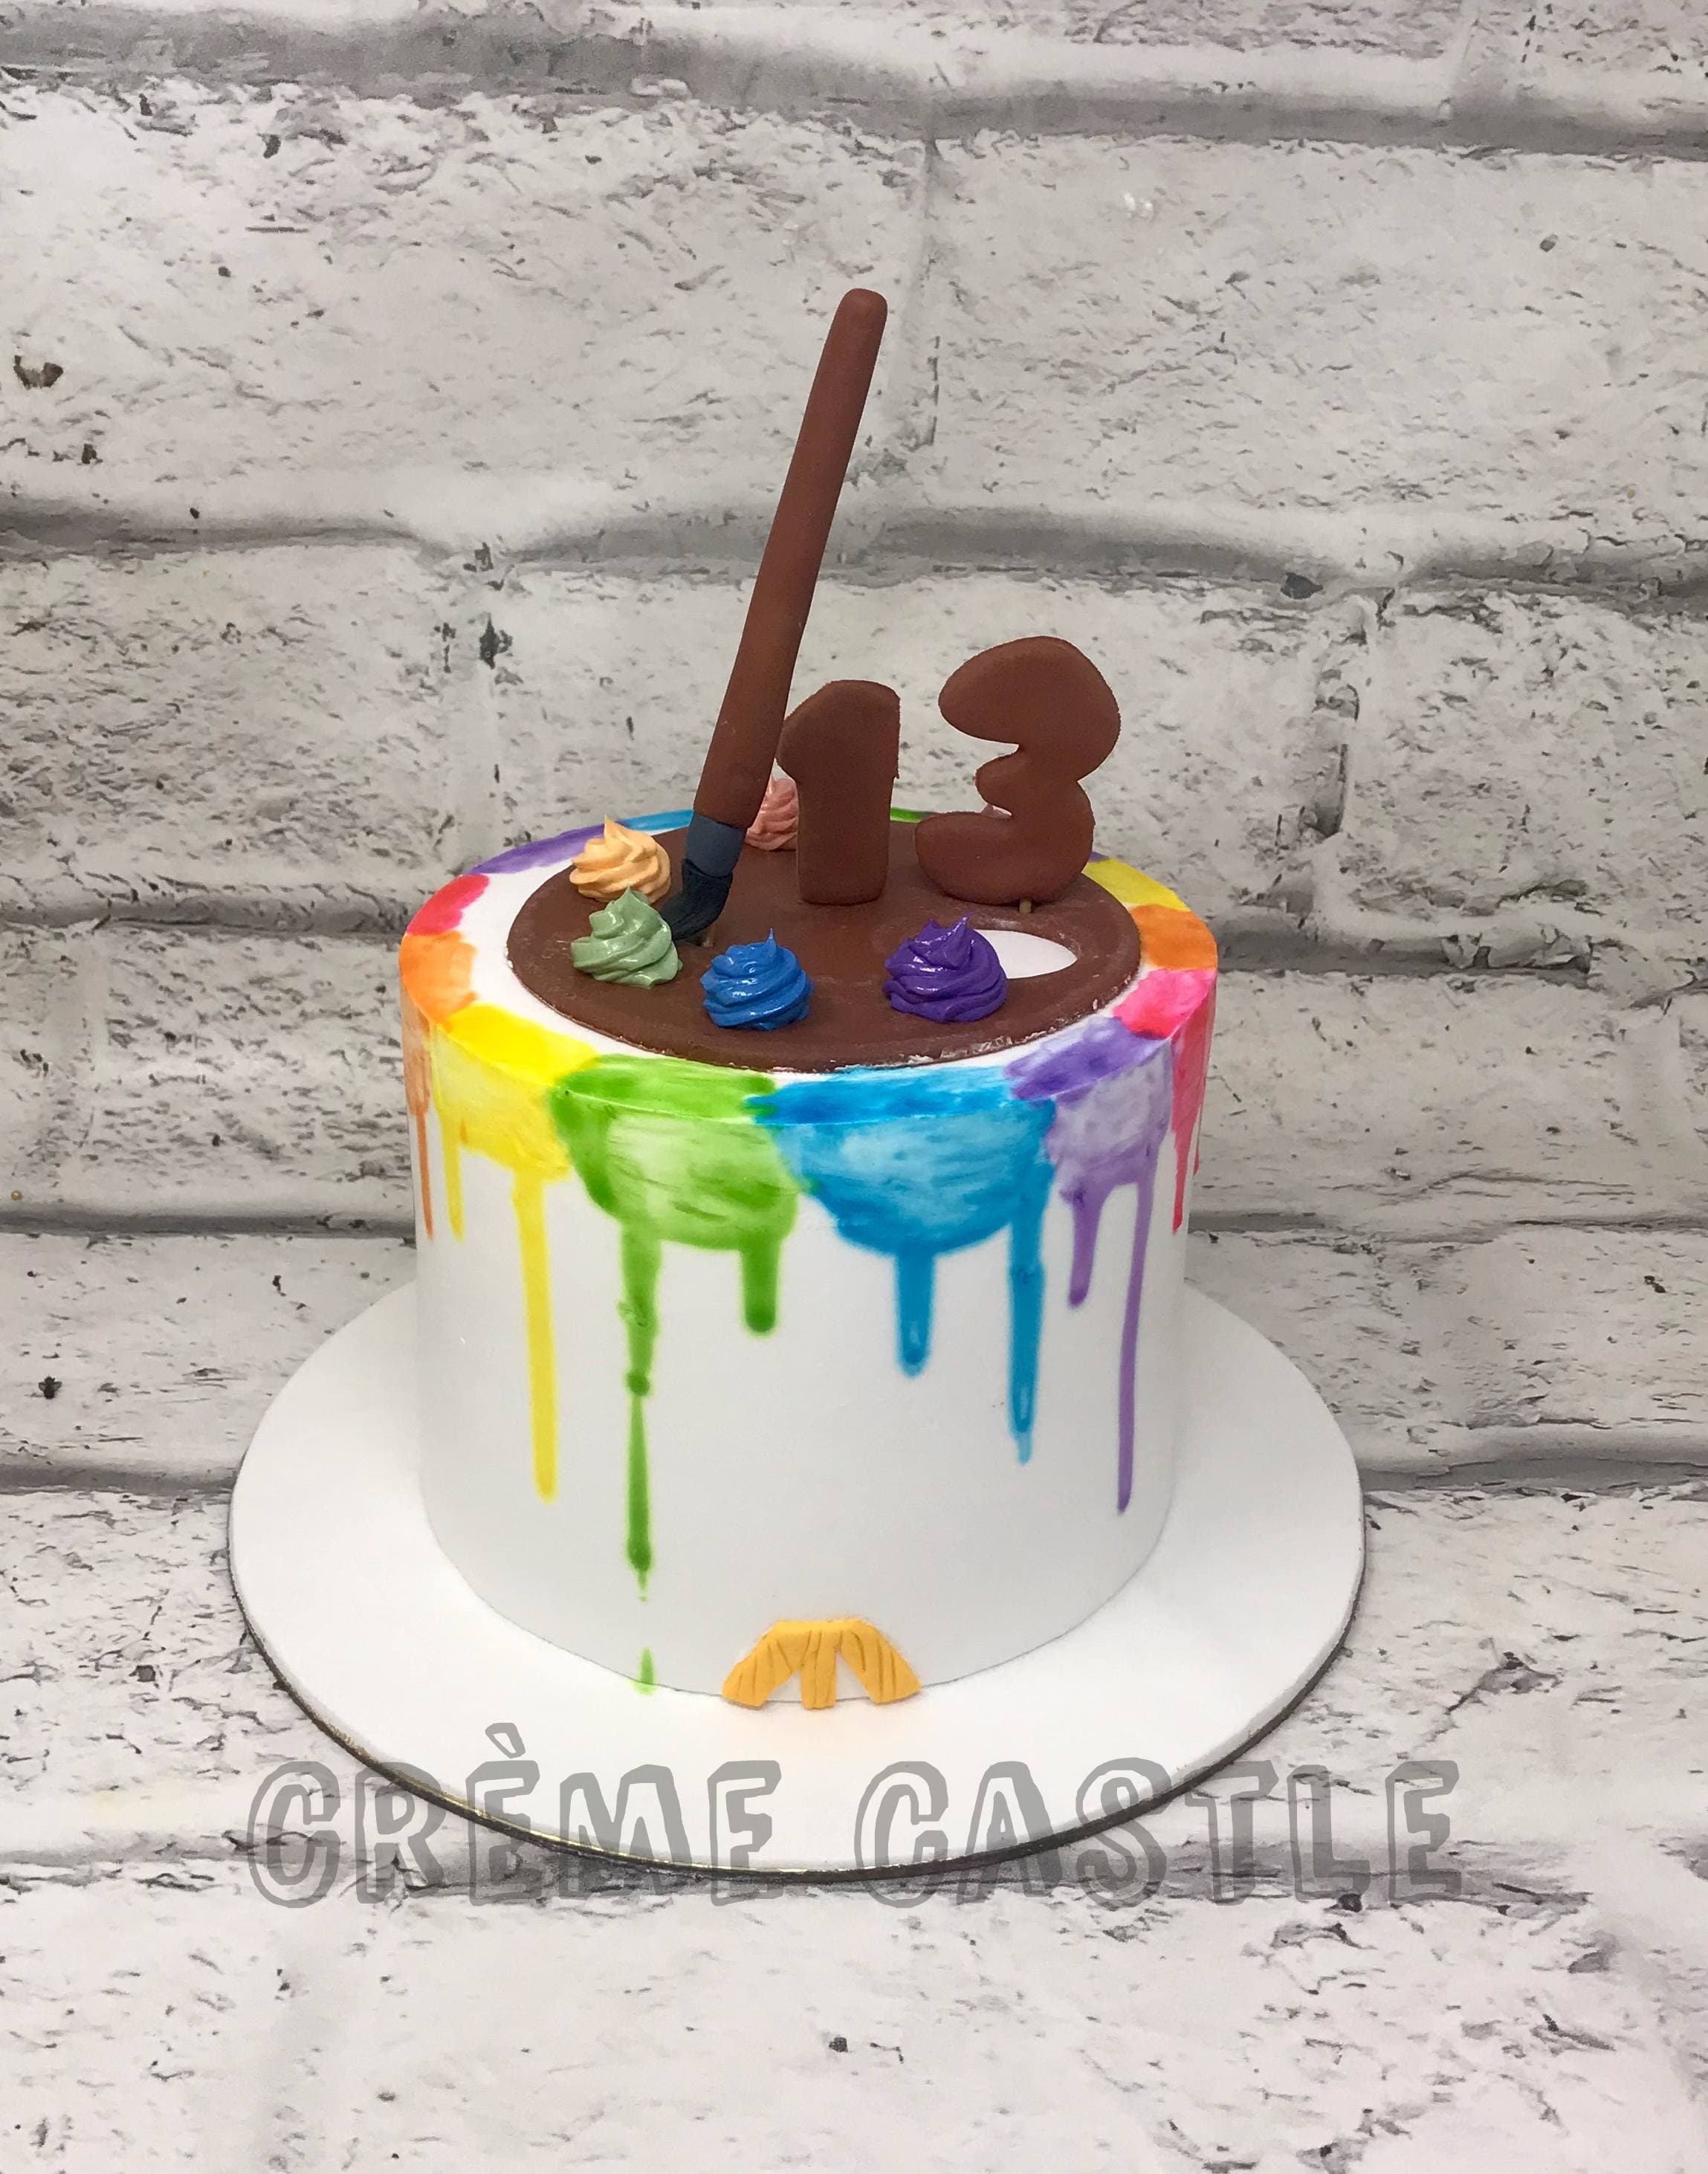 Art Cake: Easy Birthday Party Idea Using Kid's Artwork - Ideas for the Home